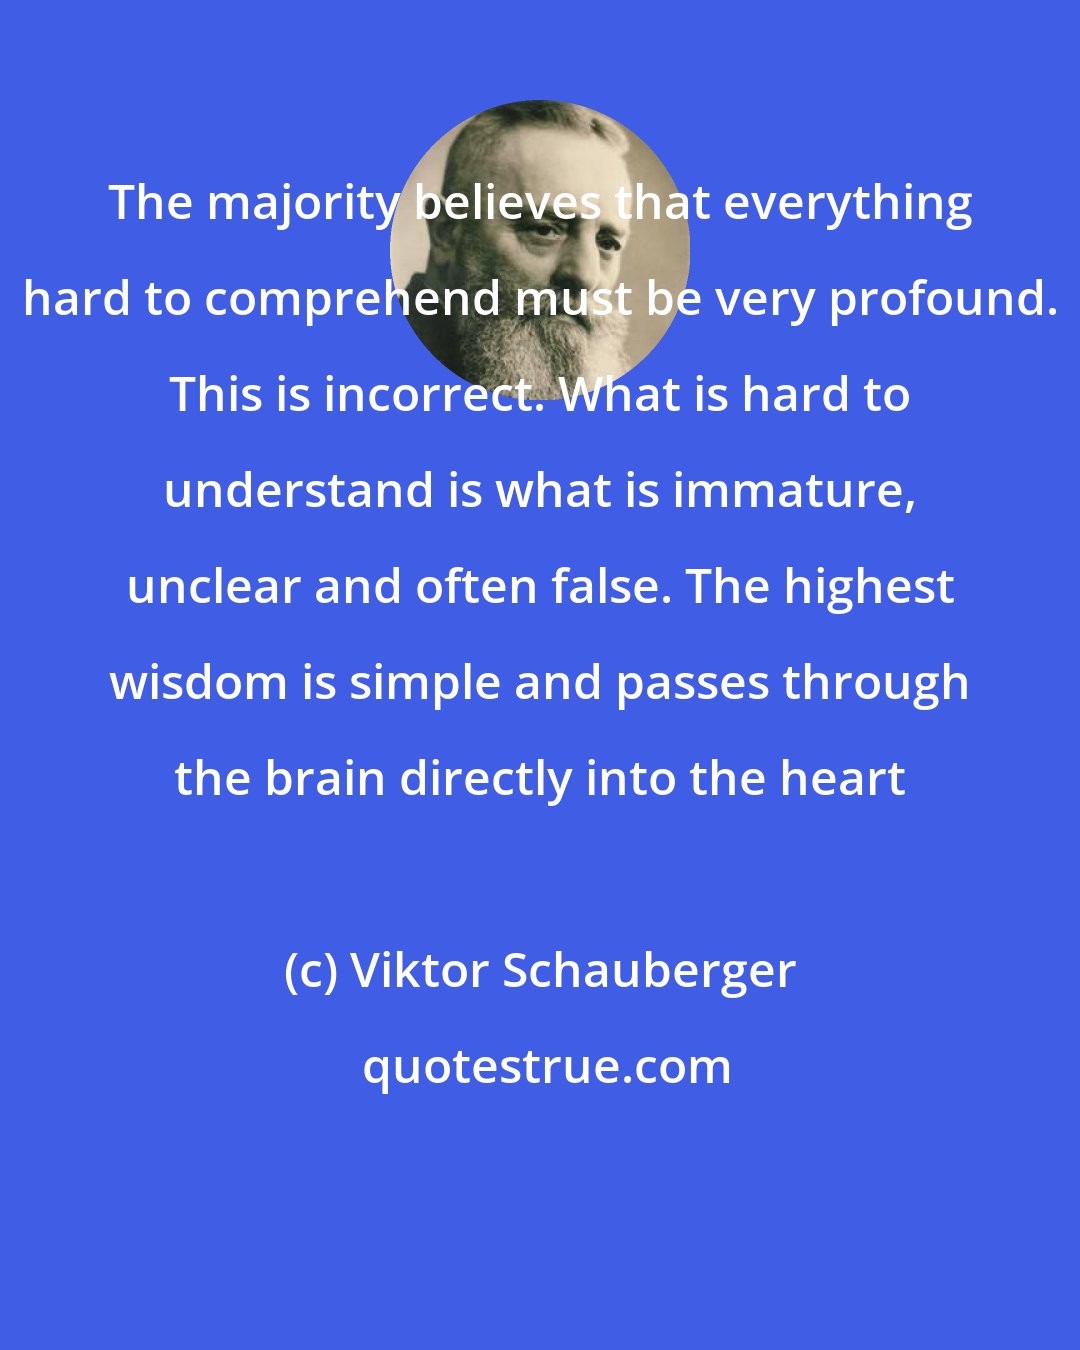 Viktor Schauberger: The majority believes that everything hard to comprehend must be very profound. This is incorrect. What is hard to understand is what is immature, unclear and often false. The highest wisdom is simple and passes through the brain directly into the heart